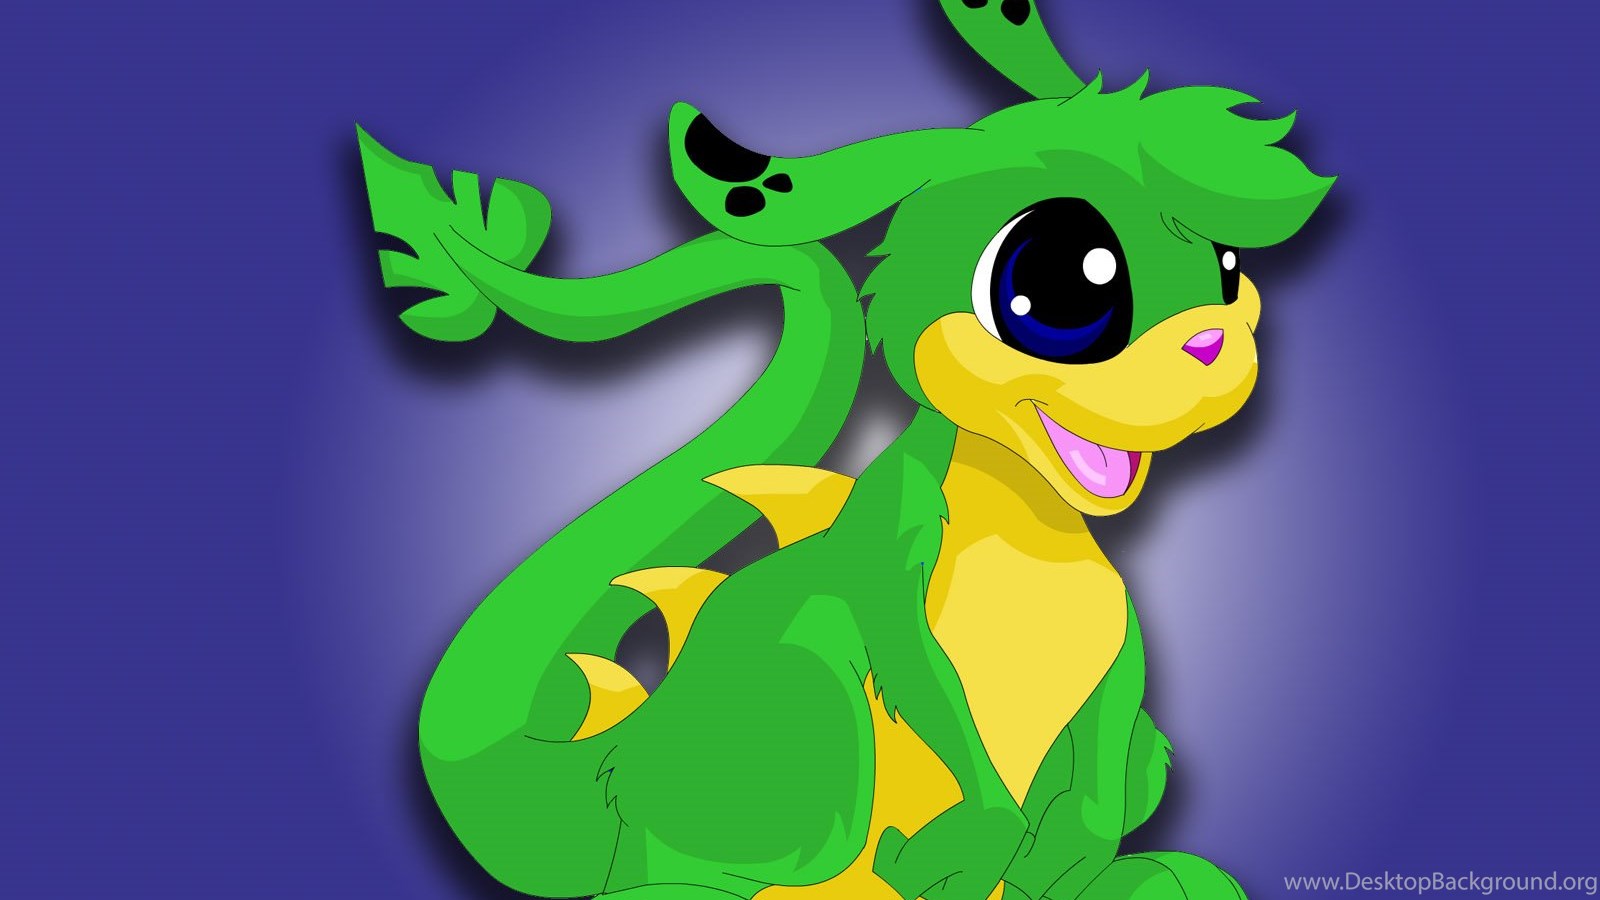 Neopets Wallpaper Free HD Background Image Picture Desktop Background